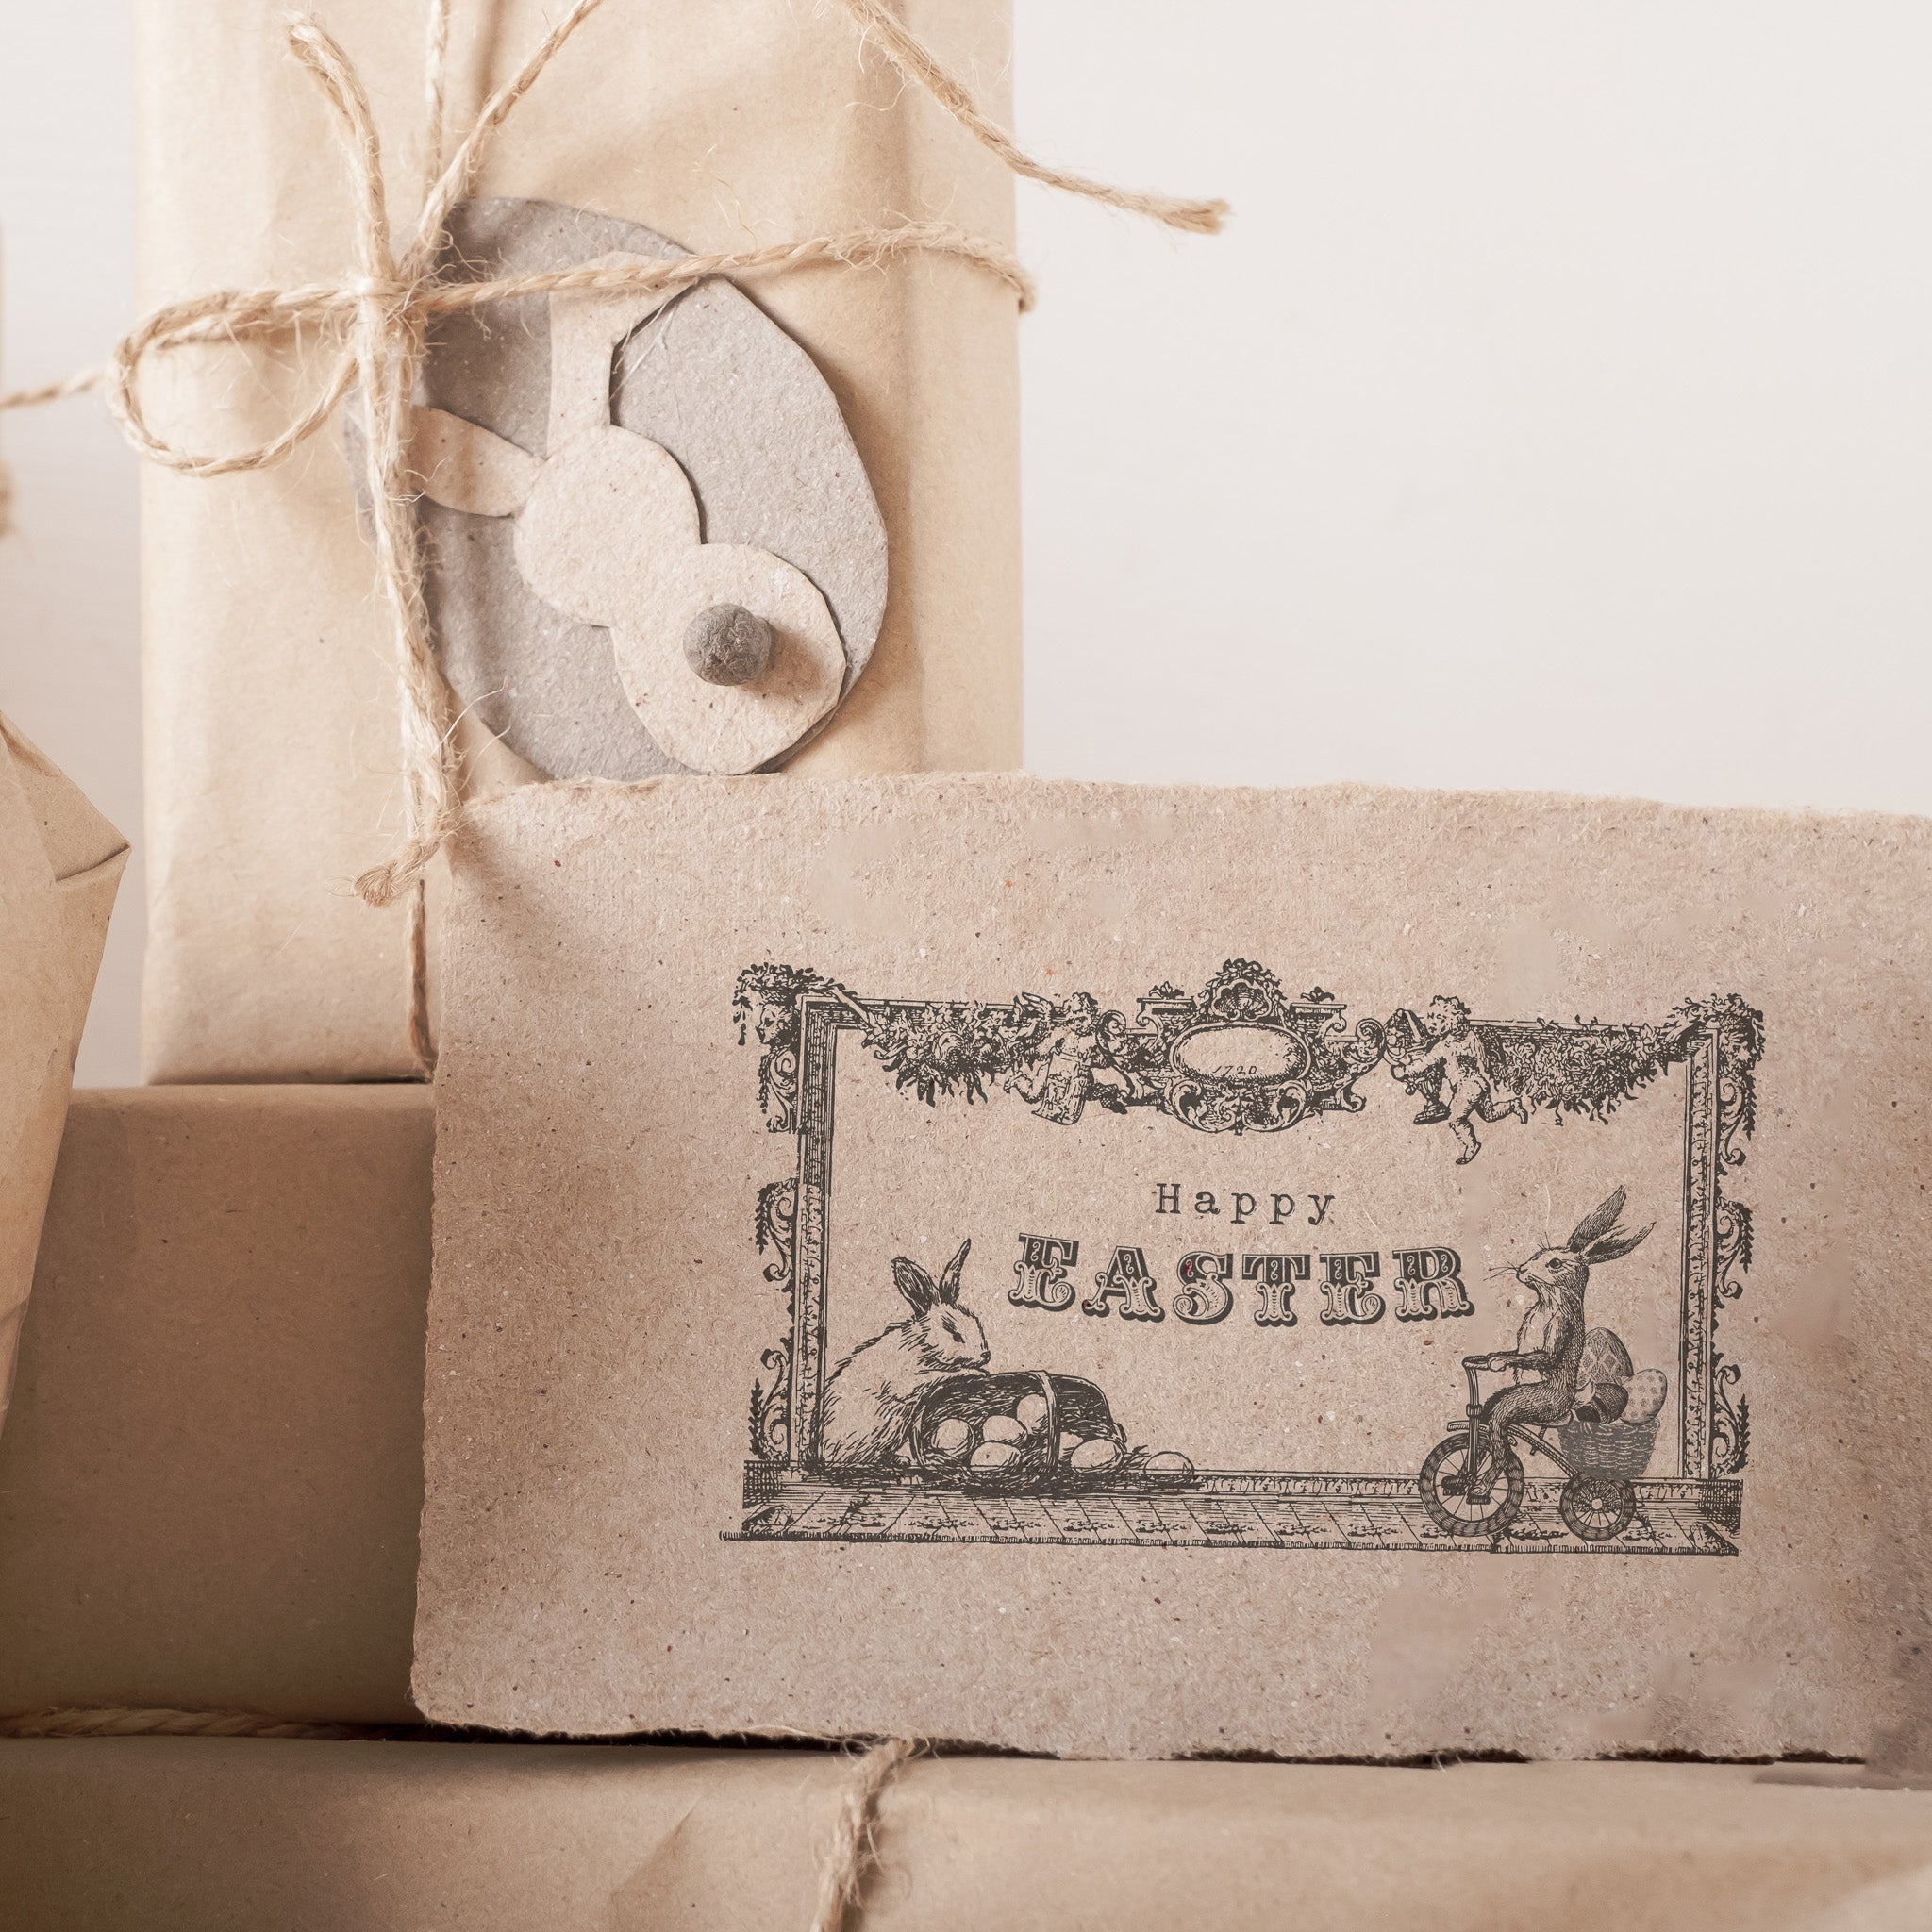 A handcut card that features a design of ReDesign with Prima's Easter Blessings stamp is sitting on brown paper wrapped gifts.